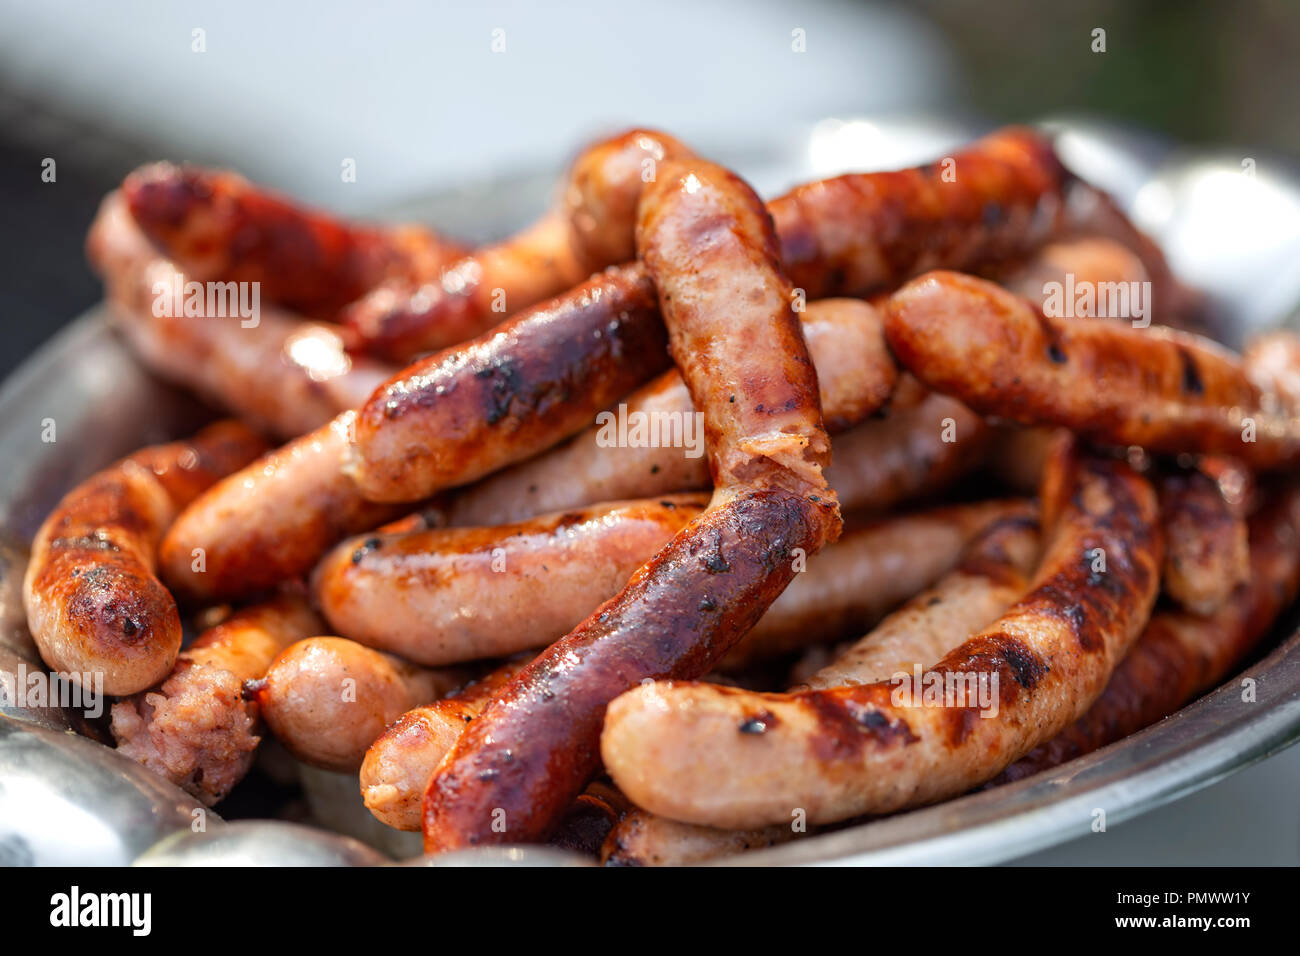 Grilleg pork sausages on the plate - close up view Stock Photo